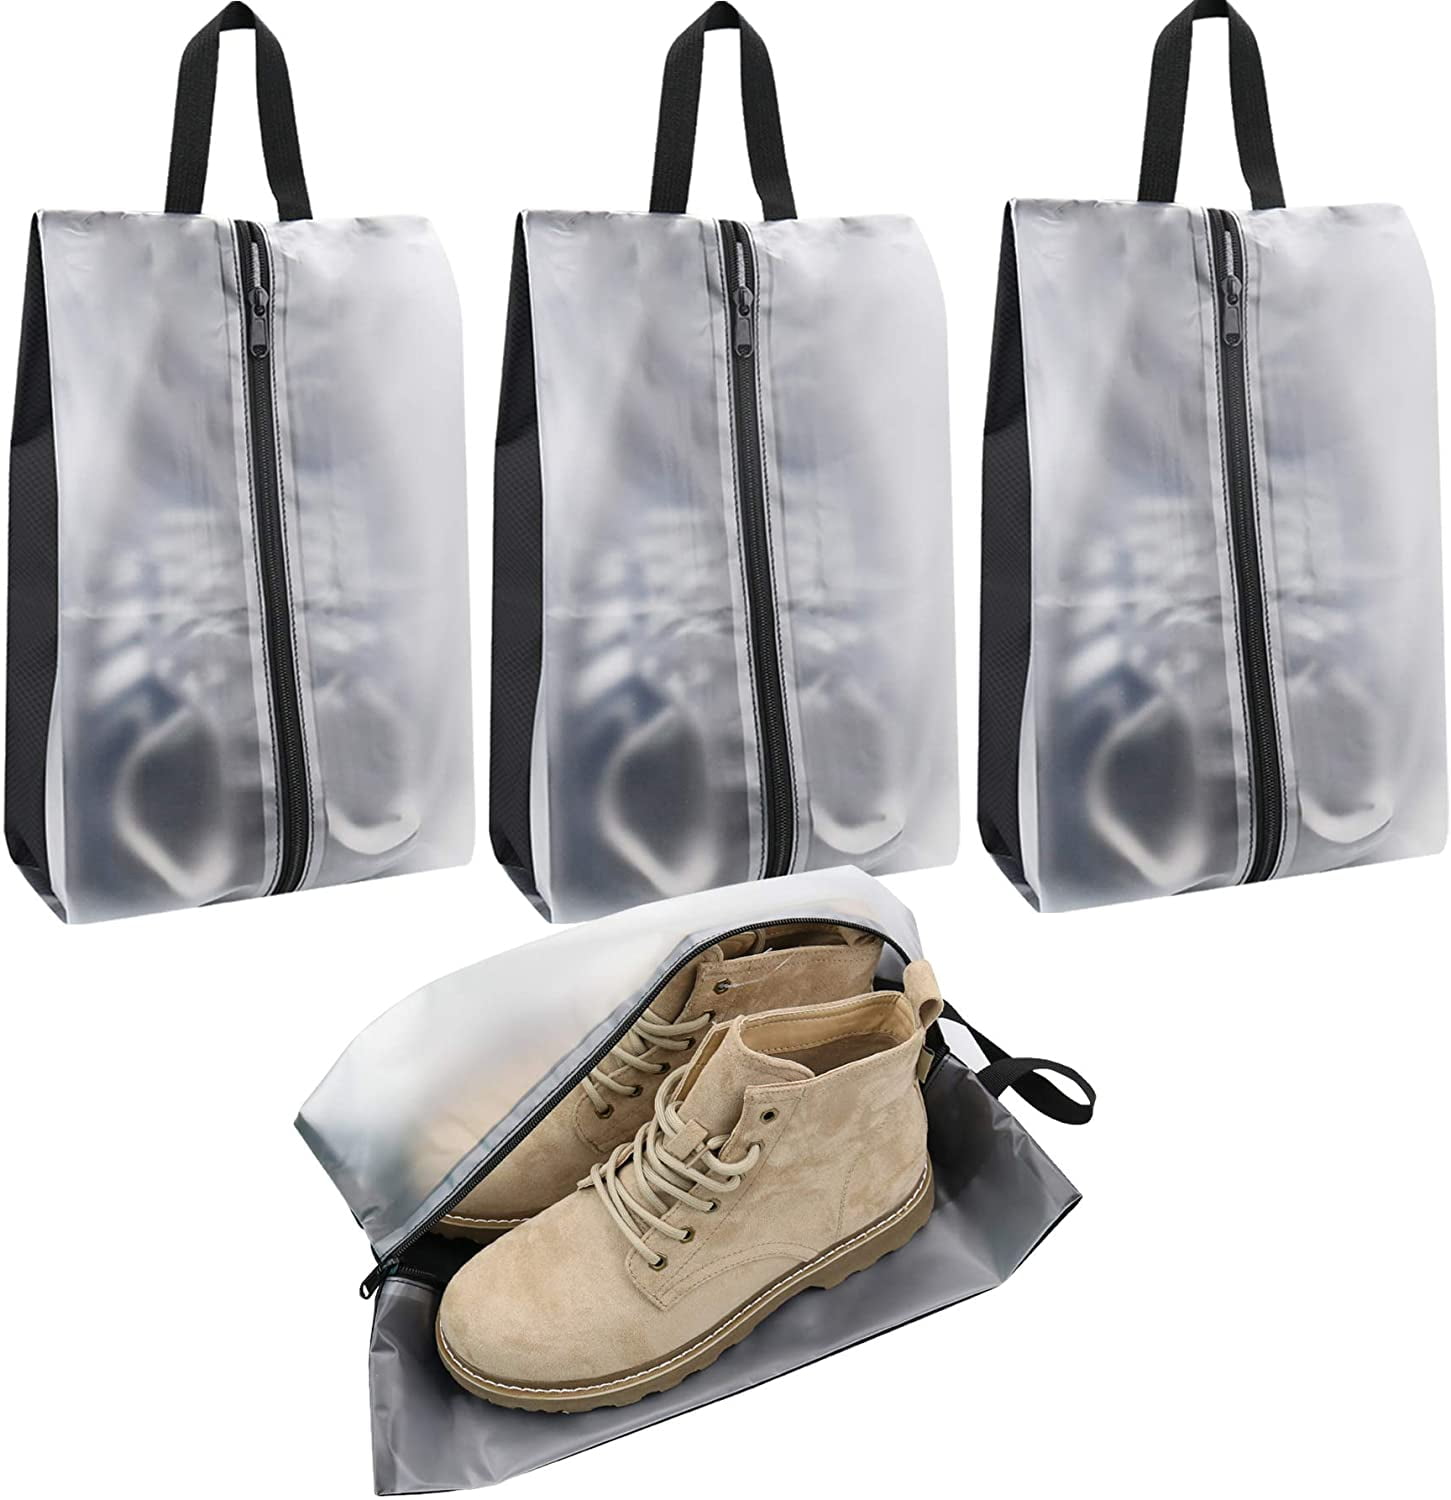 4 Pack EKEES Clear Perforated Drawstring shoe bag for hanging organizing travel 